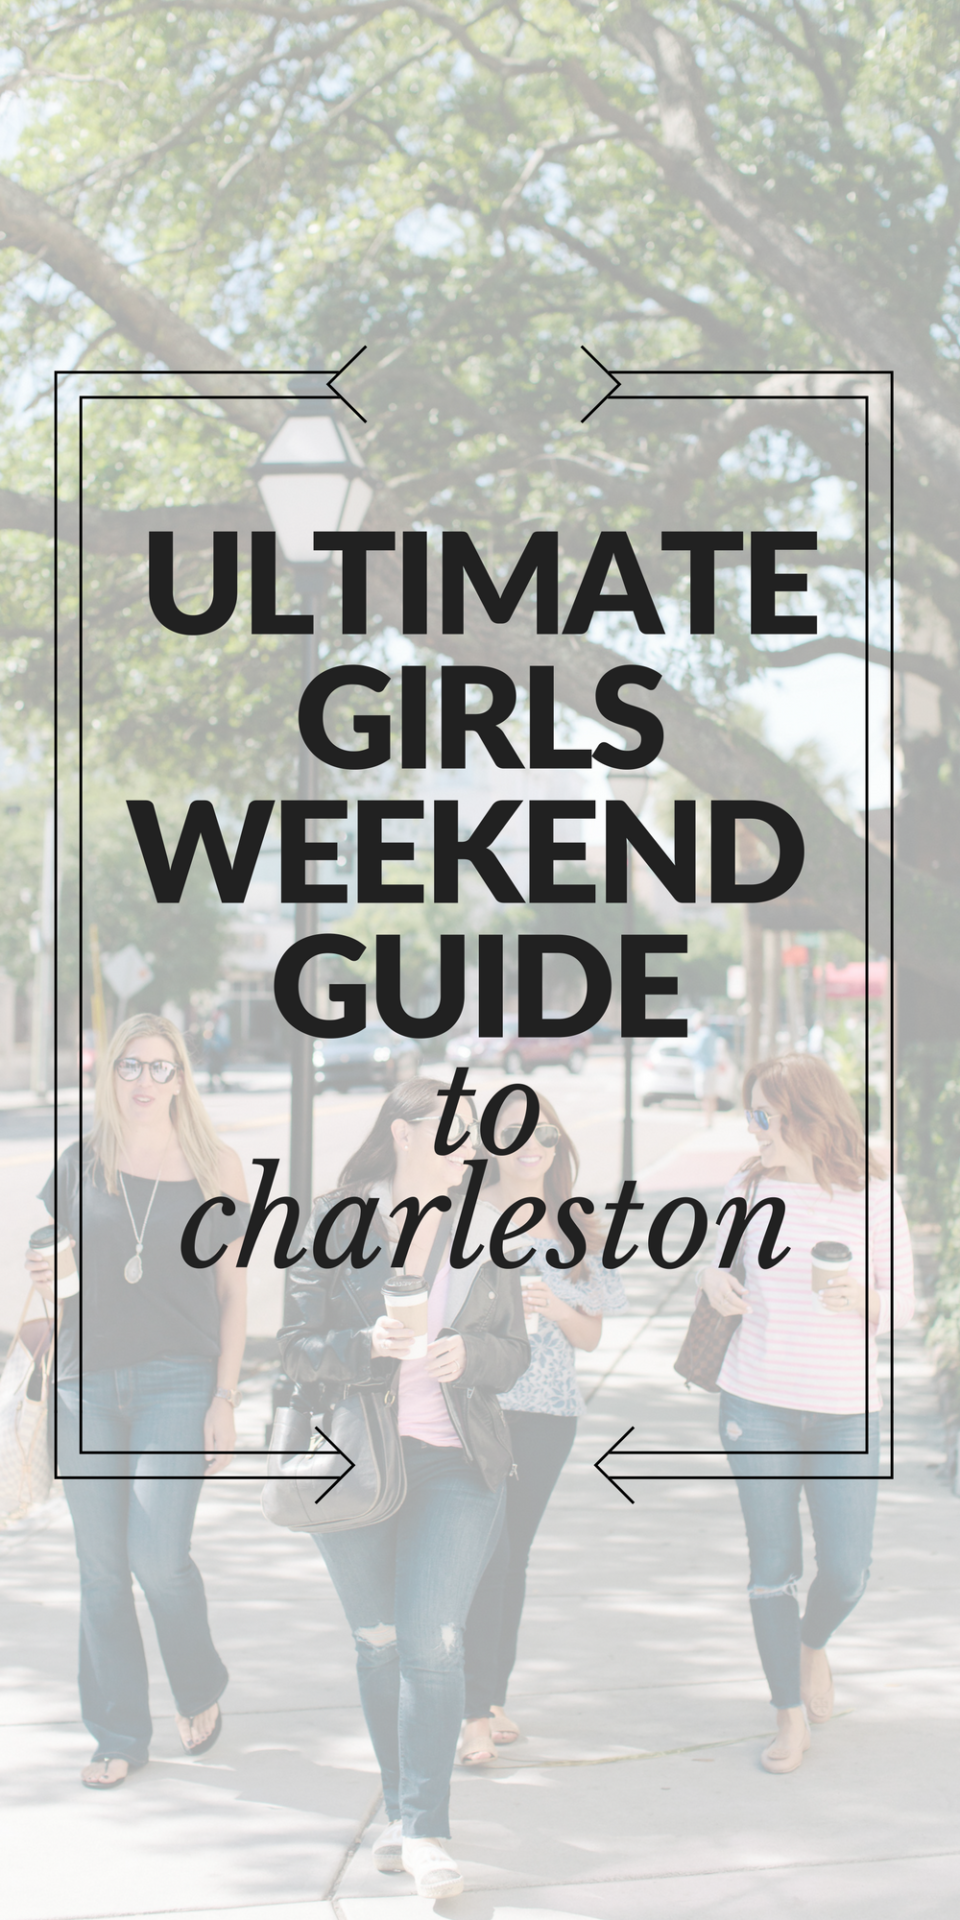 The Ultimate Girls Weekend Guide to Charleston 